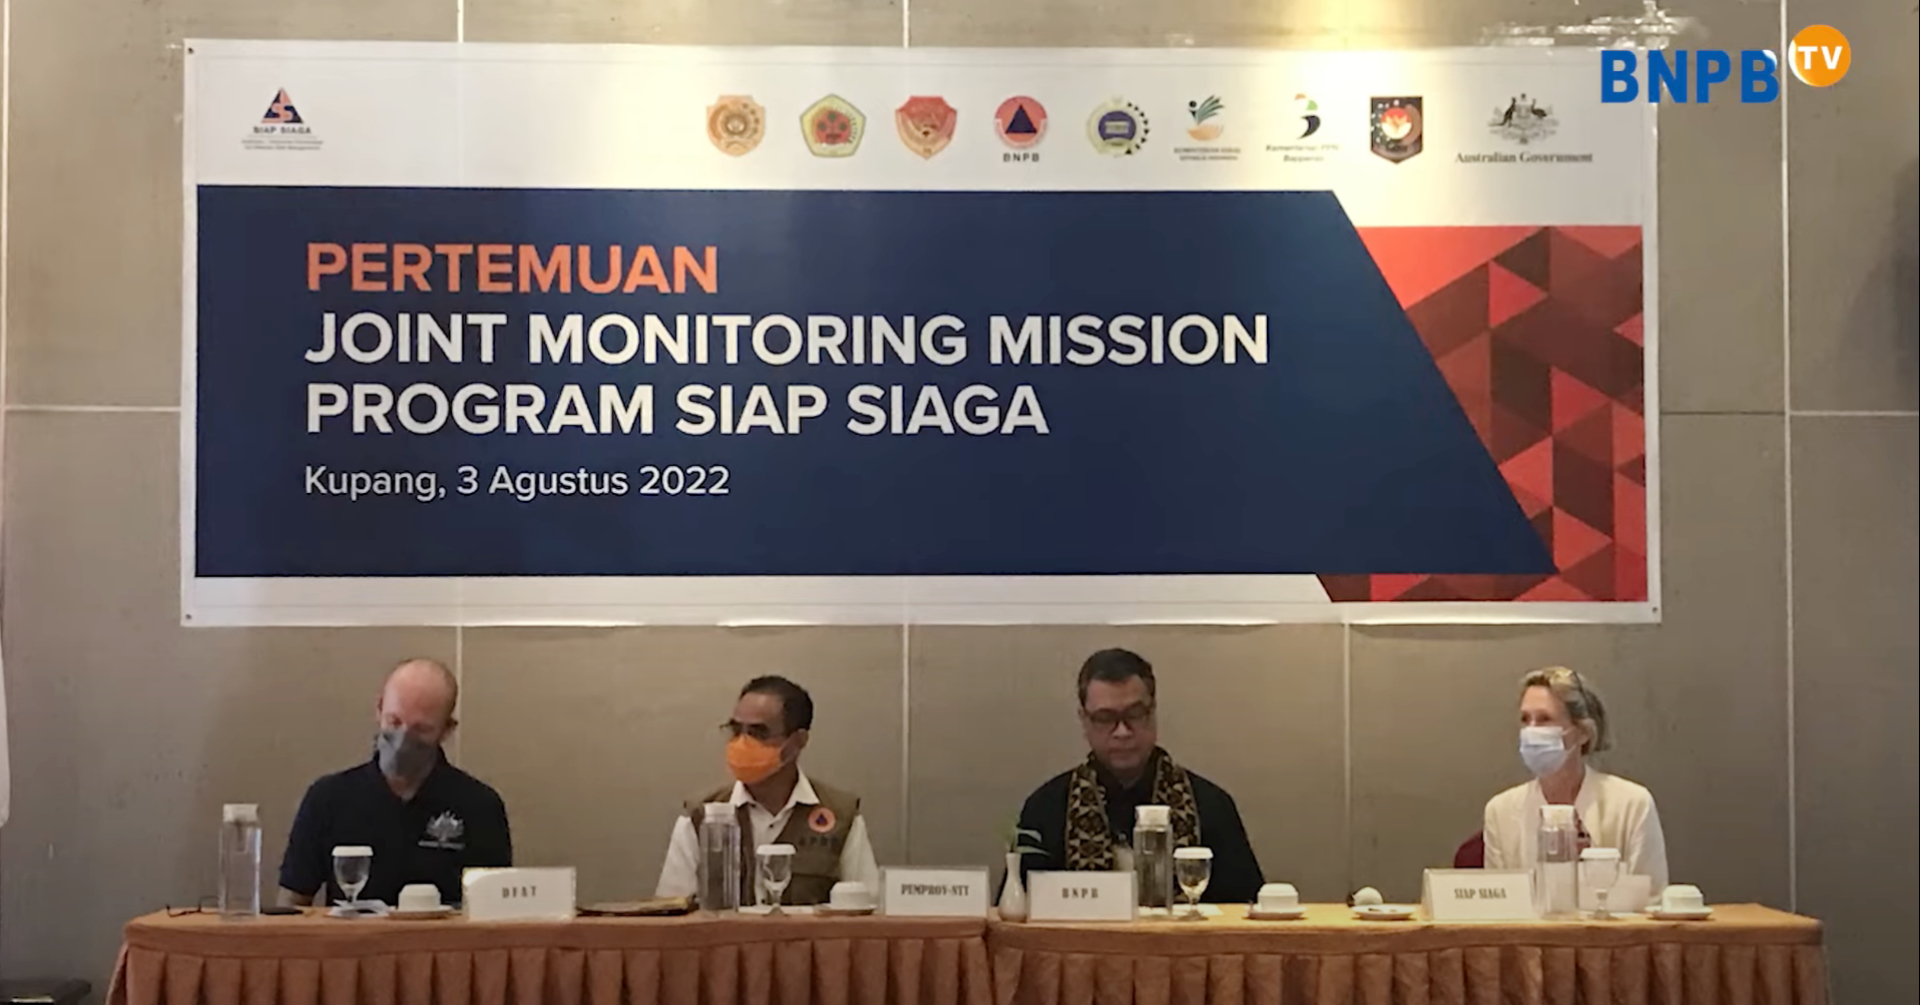 SIAP SIAGA Held Its First Joint Monitoring Mission